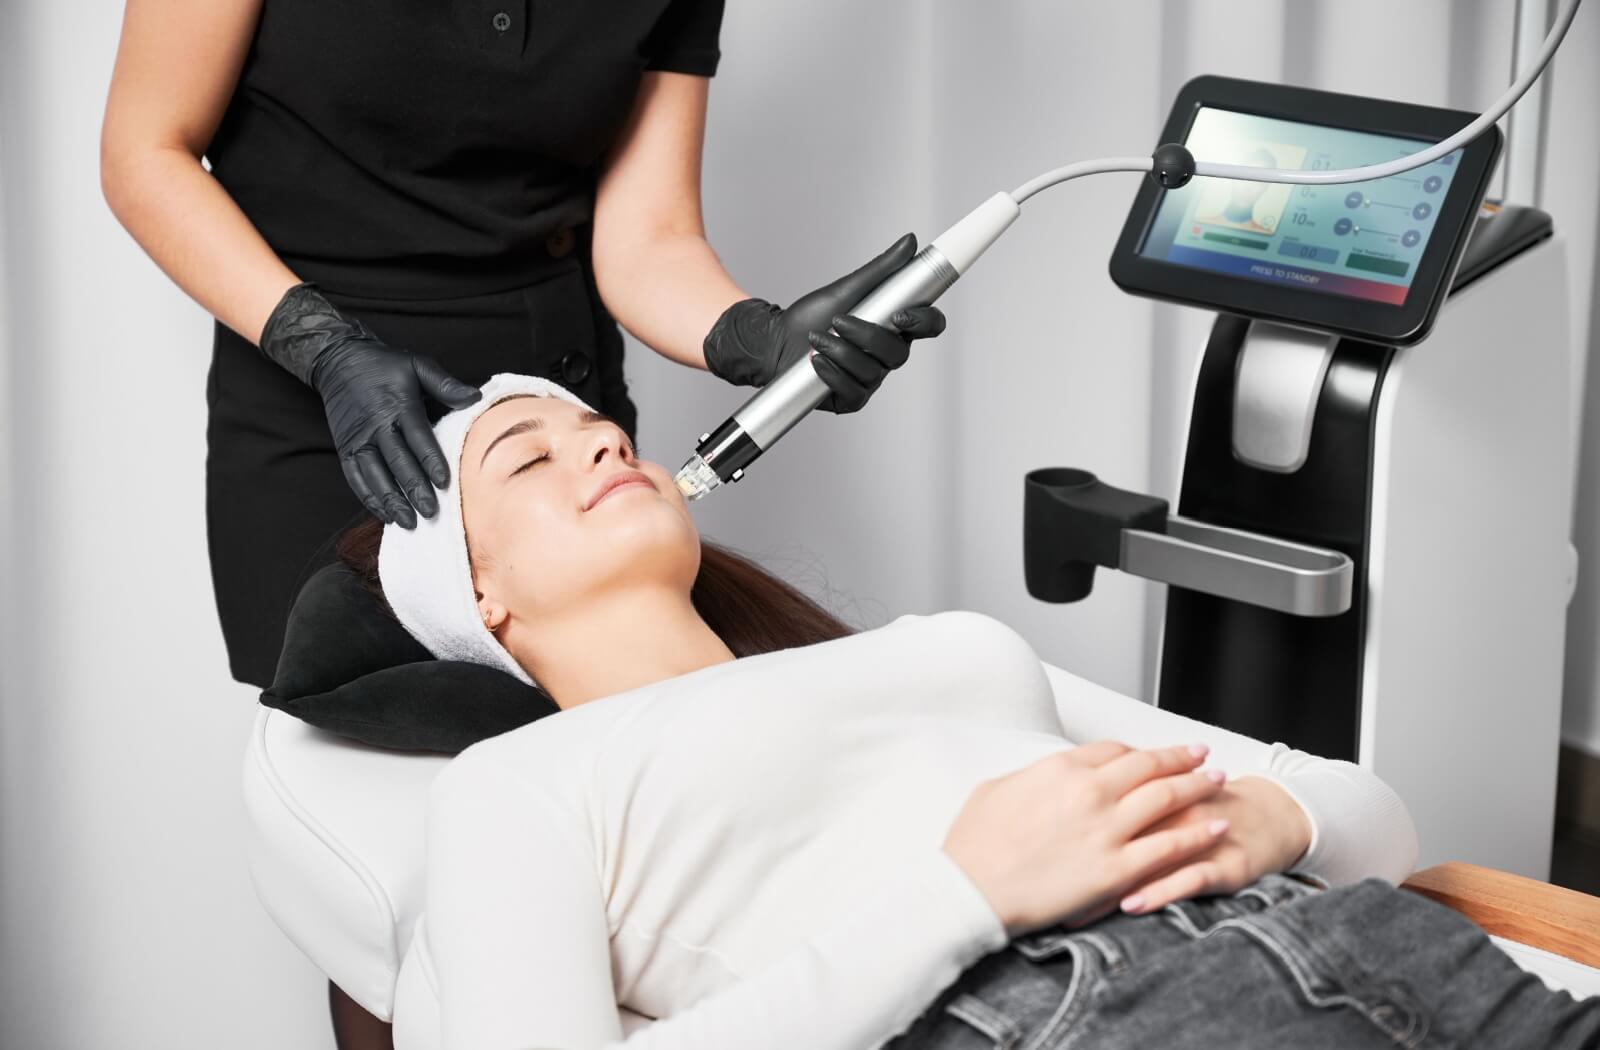 A skin care professional using radiofrequency microneedling to treat a female patient's face